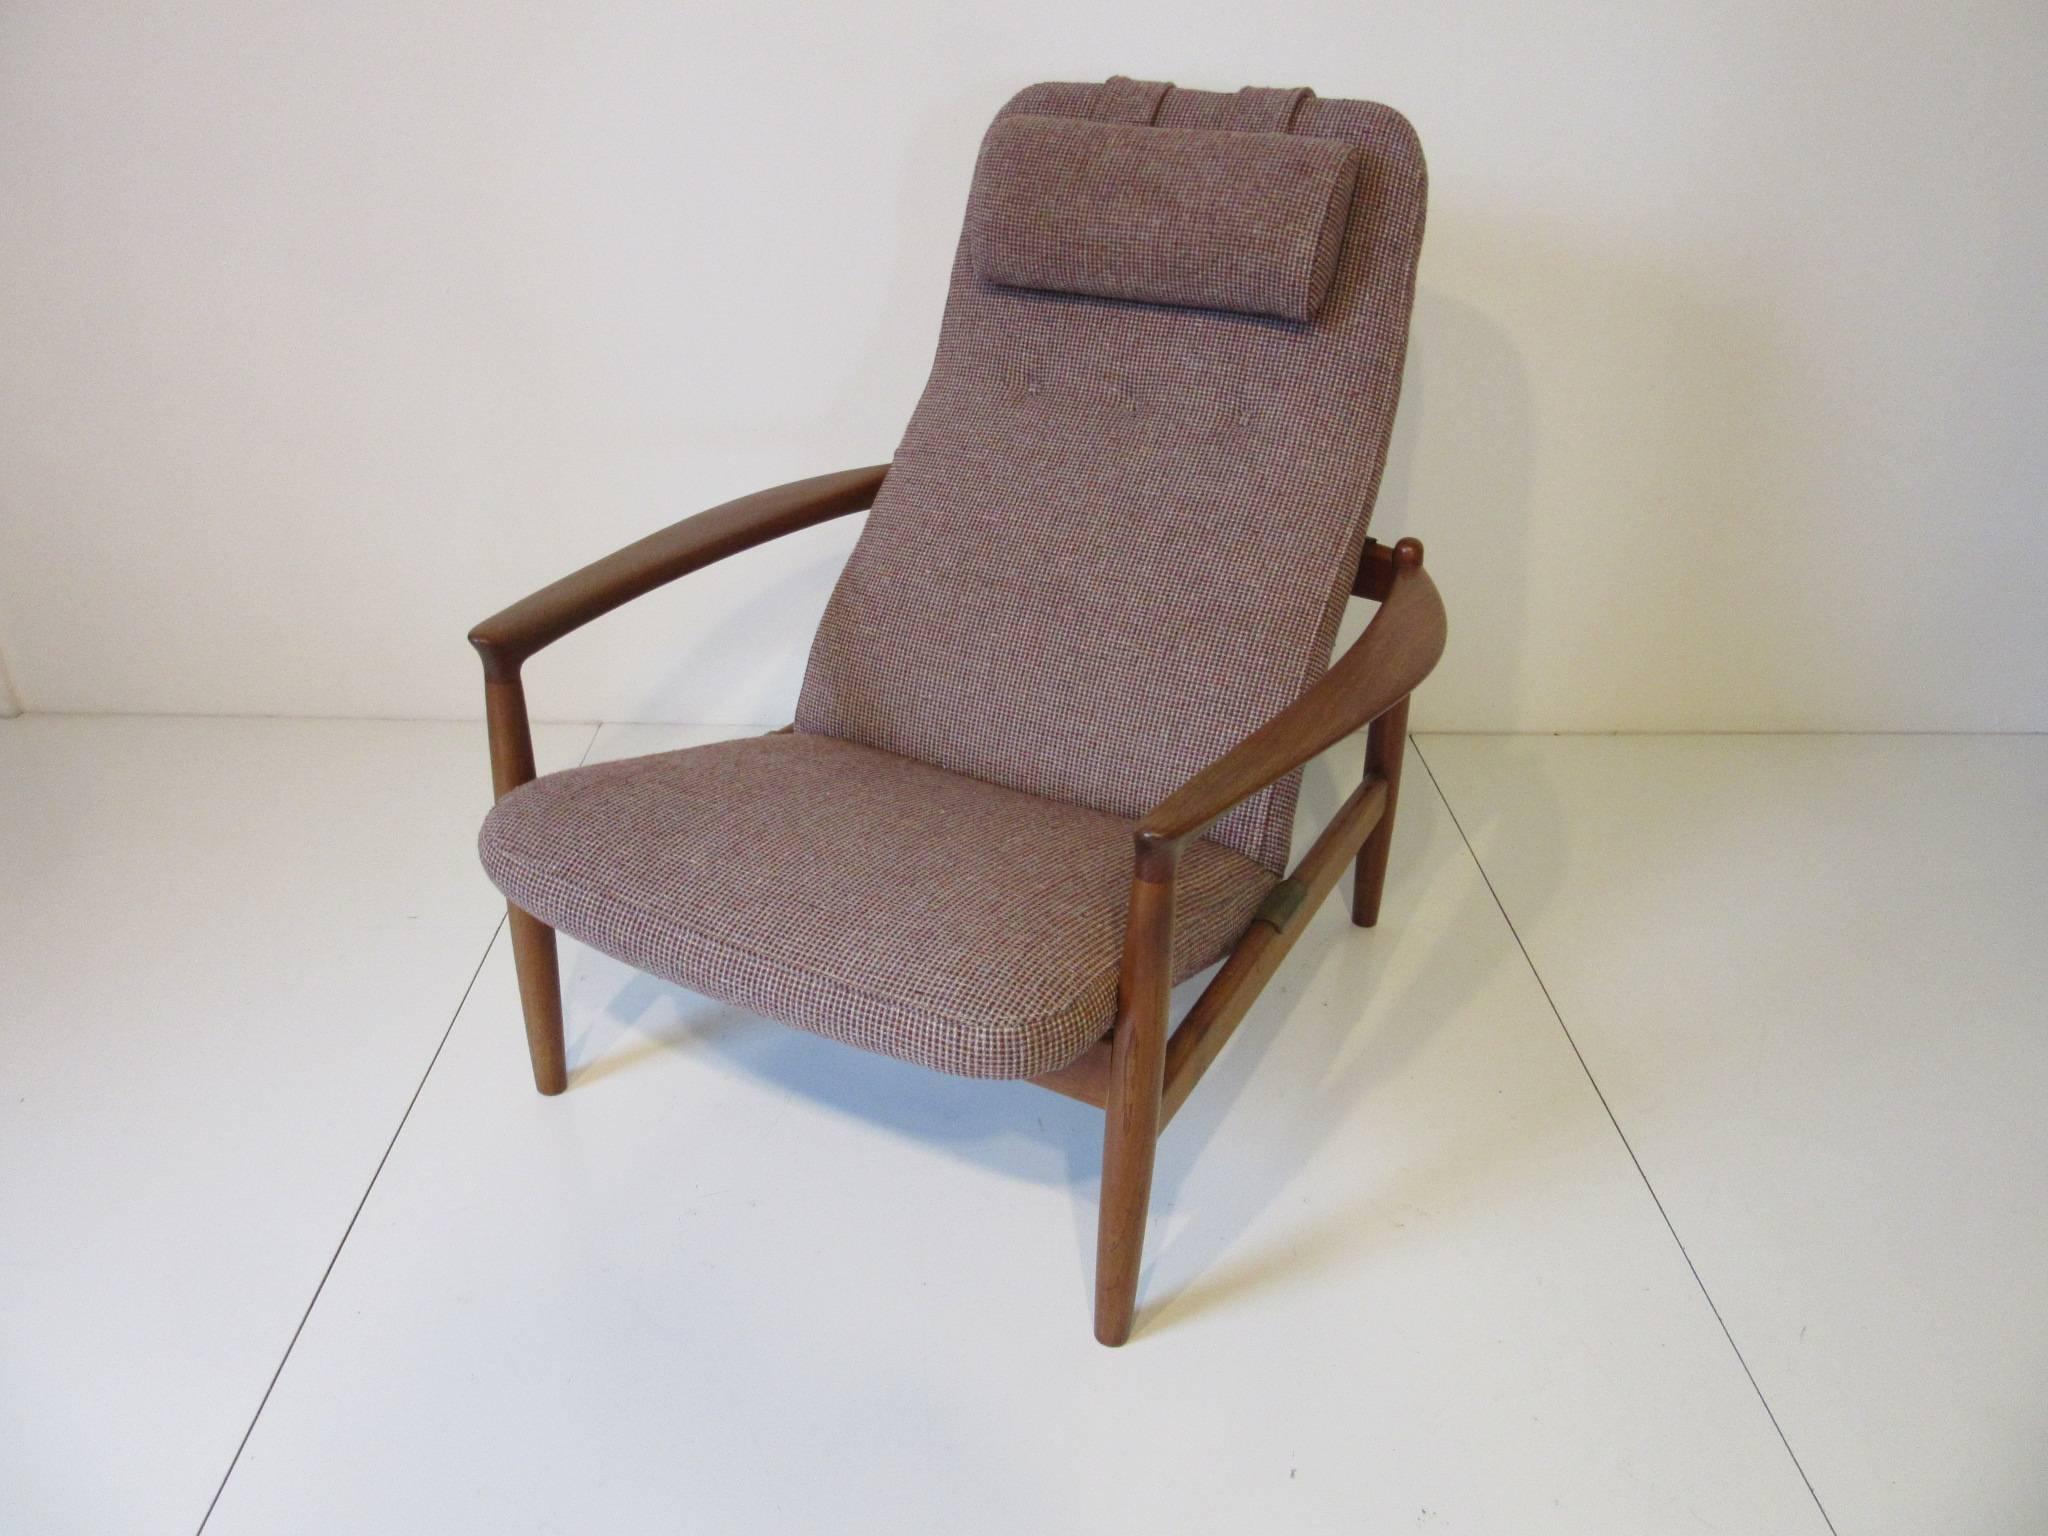 20th Century Danish Styled Lounge Chair by Folke Ohlsson for DUX